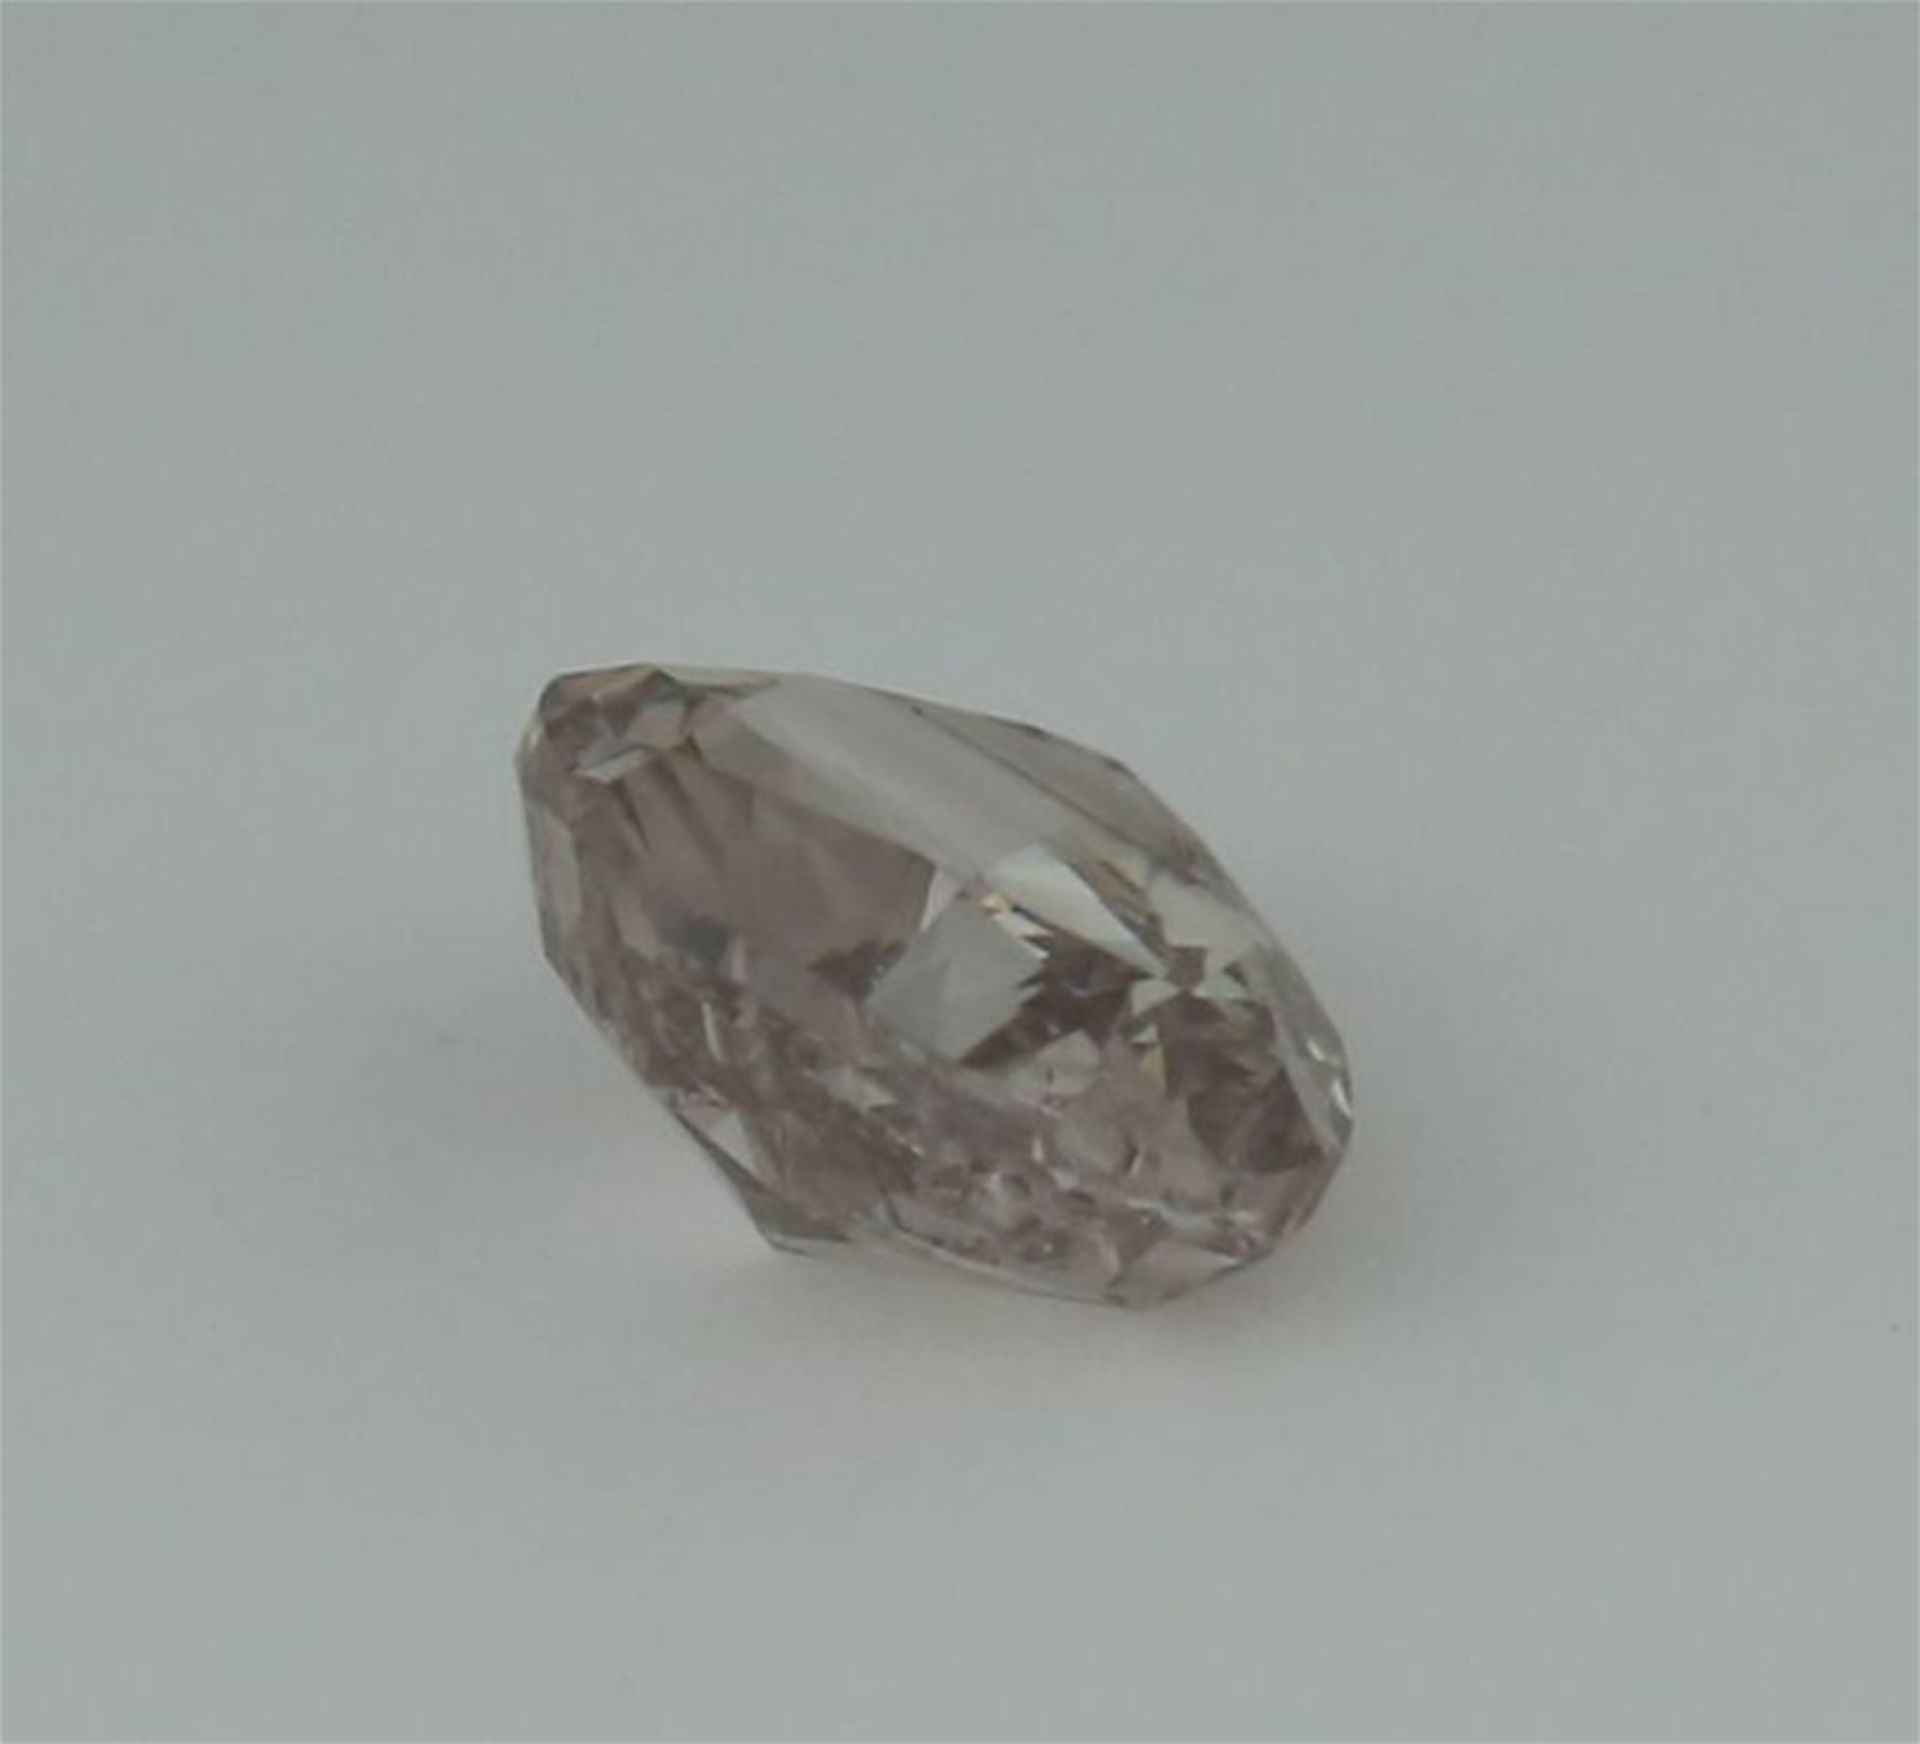 IGI Certified 0.52 ct. Pear Modified Brilliant Diamond - Very Light Brown - SI 2 UNTREATED - Image 5 of 9